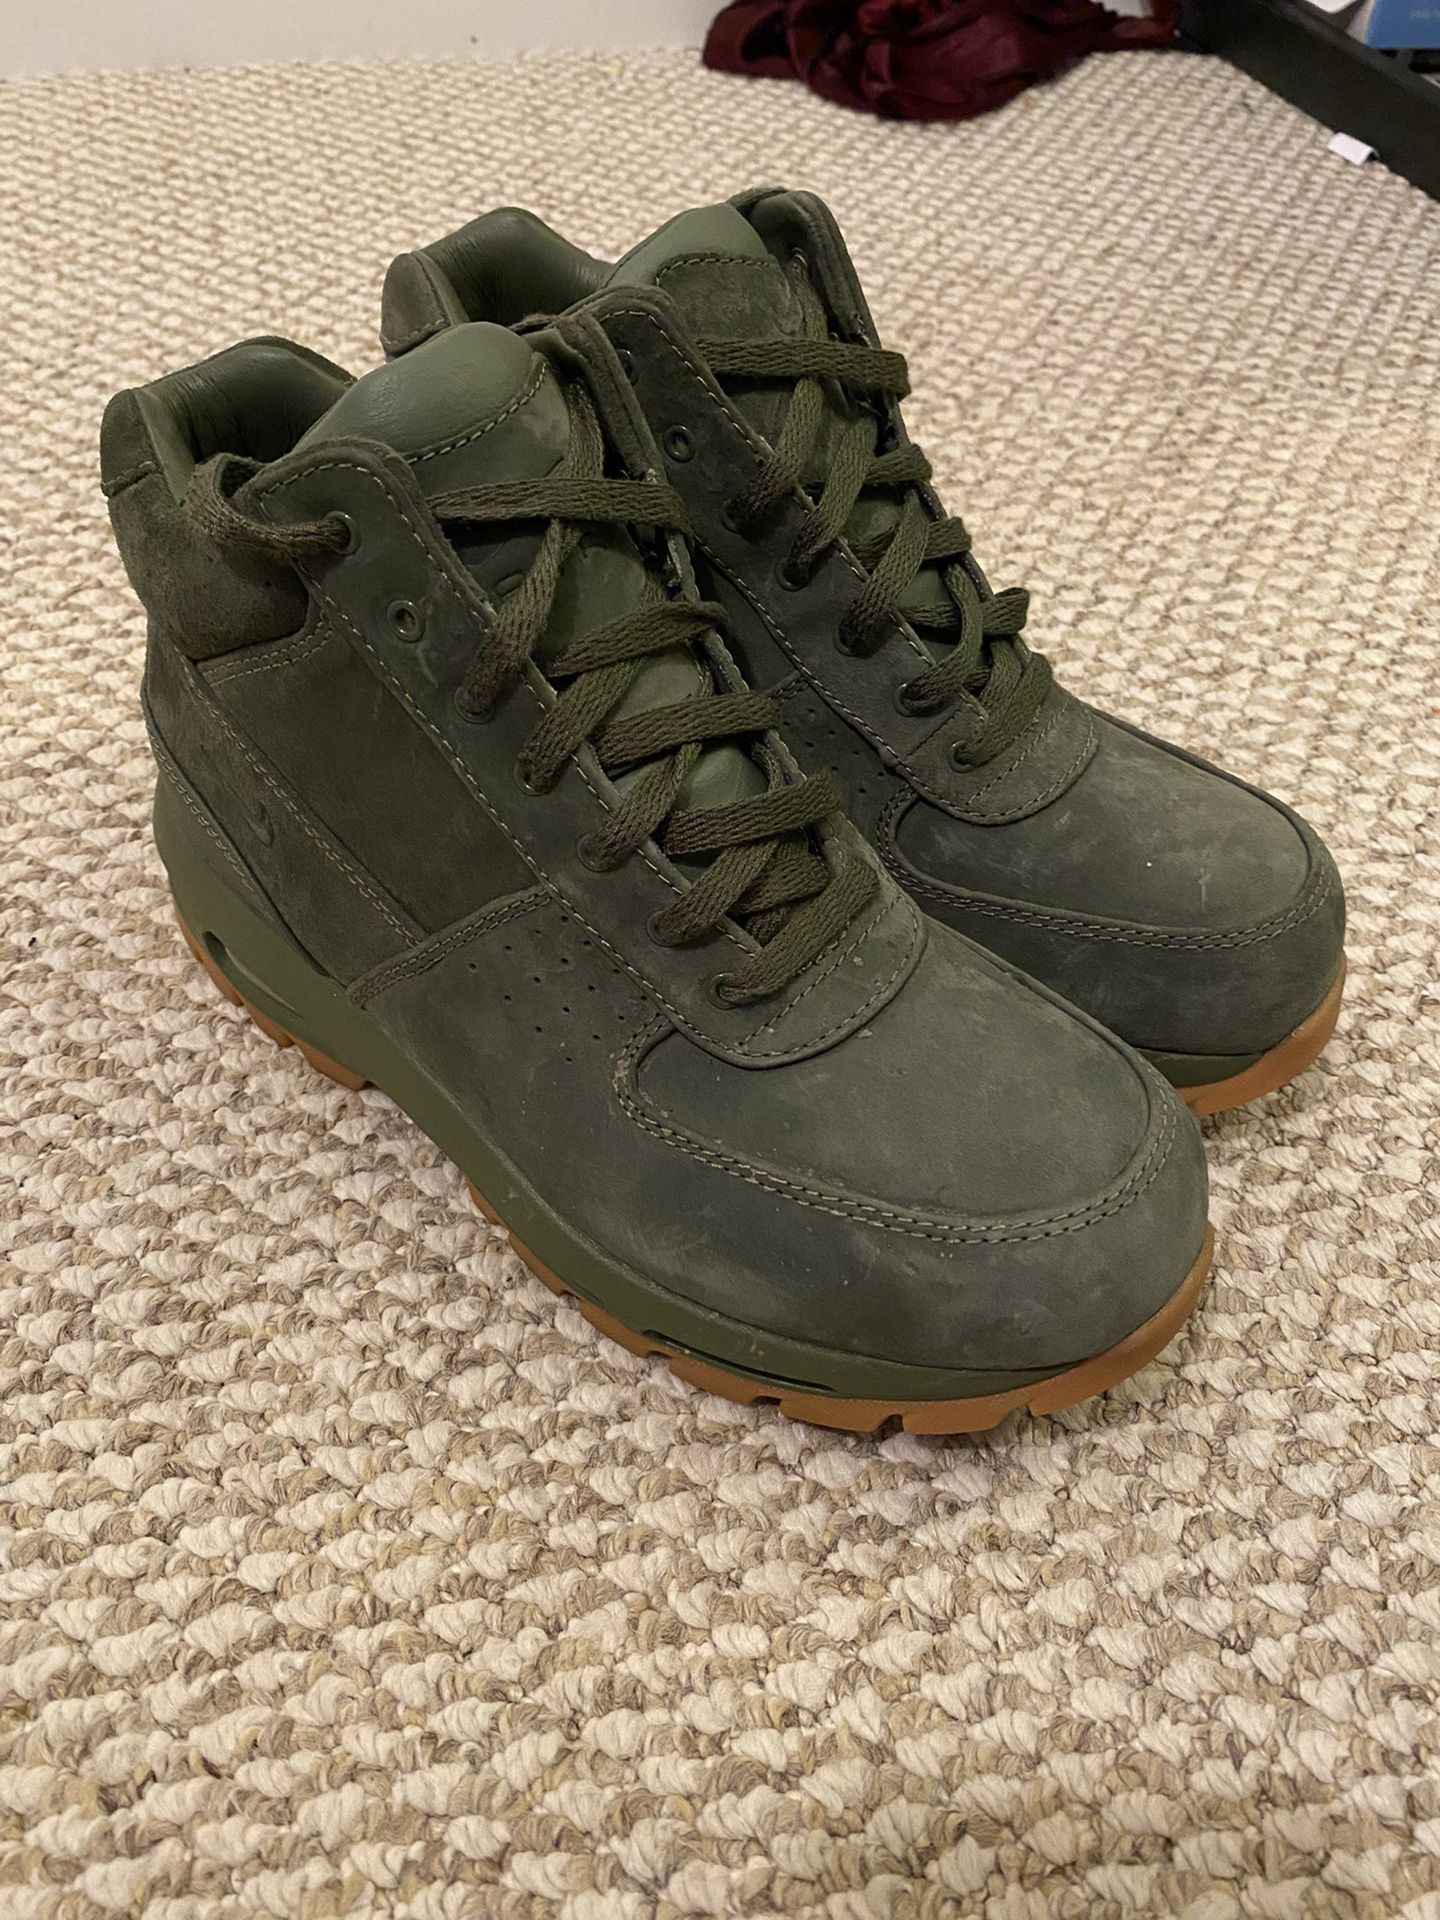 Nike ACG boots ! Size 9